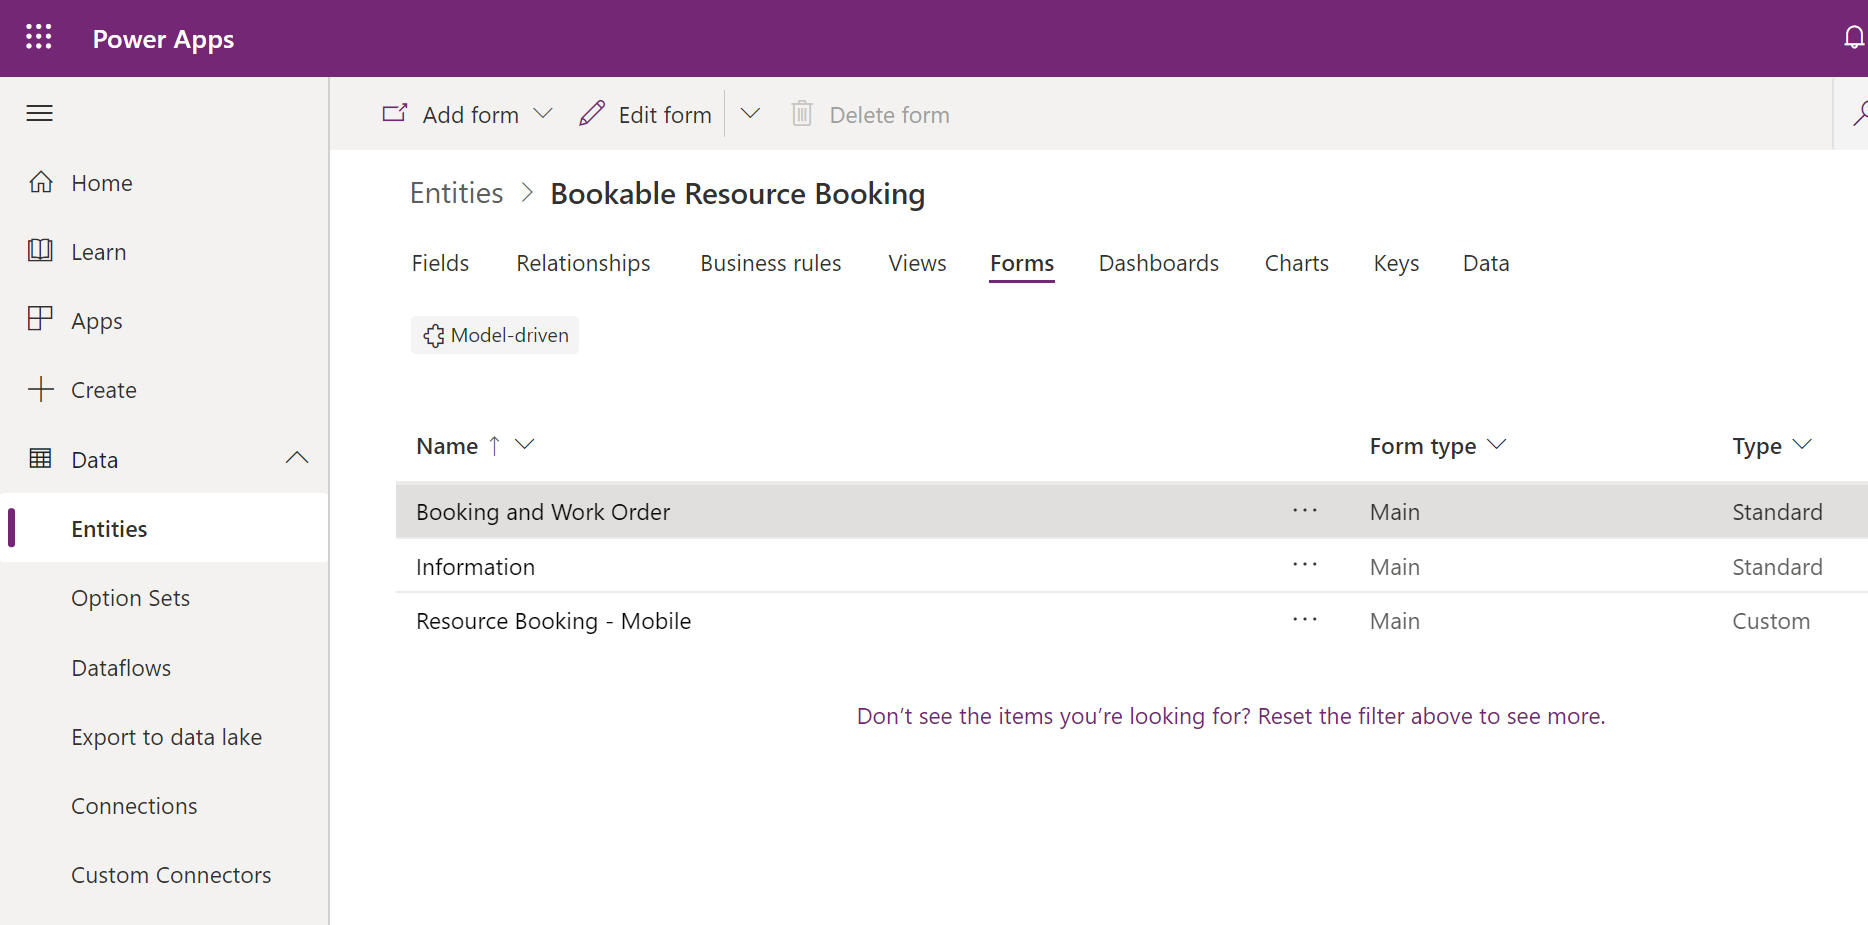 Screenshot of a Bookable Resource Booking in Power Apps, showing the Booking and Work Order form.